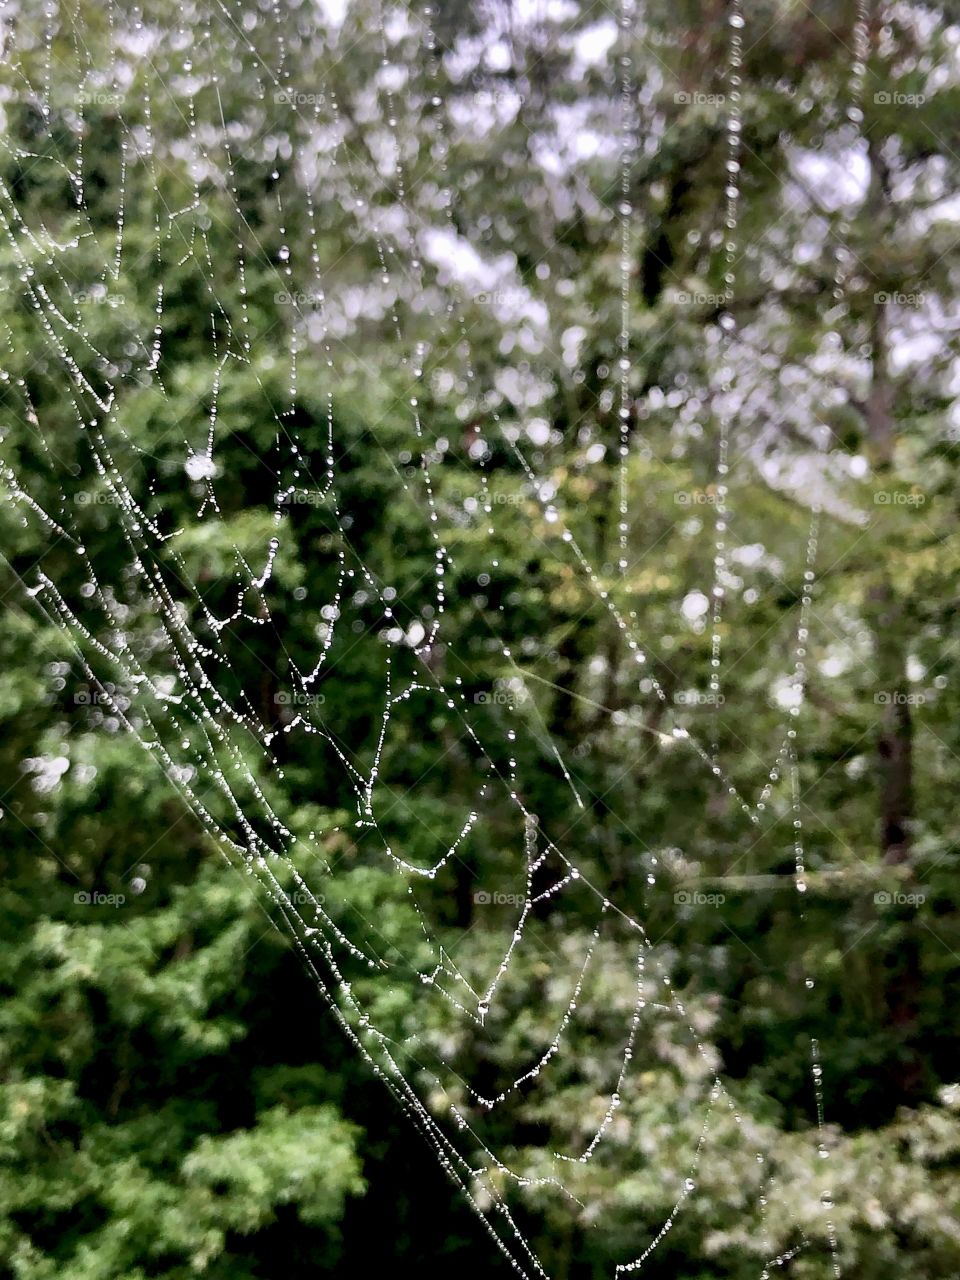 Rainy day in the woods highlights spiderweb 